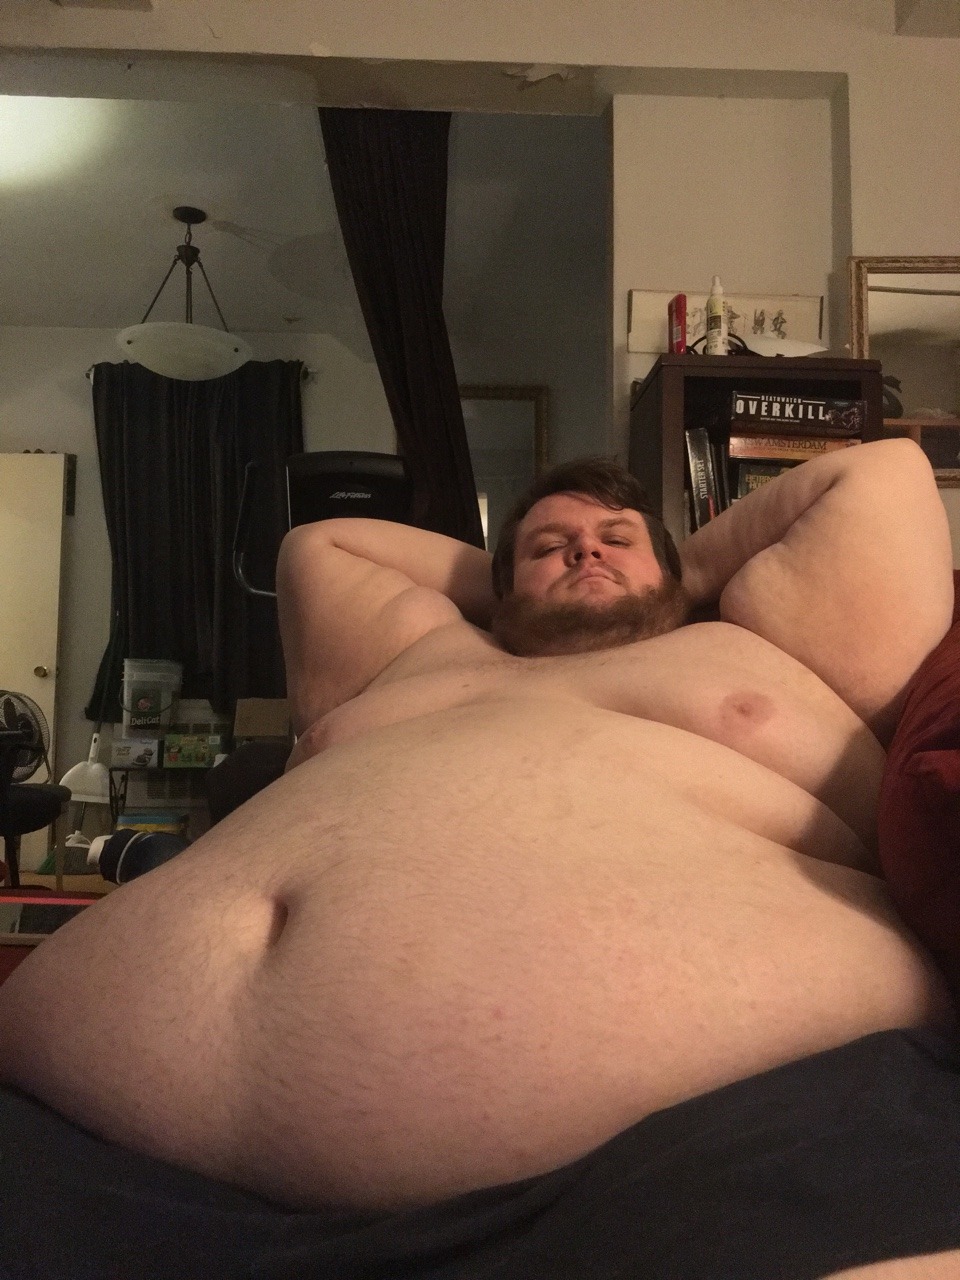 fatbestfriend:   Can you guess my sexy secret? 😉  I’m filled with thousands